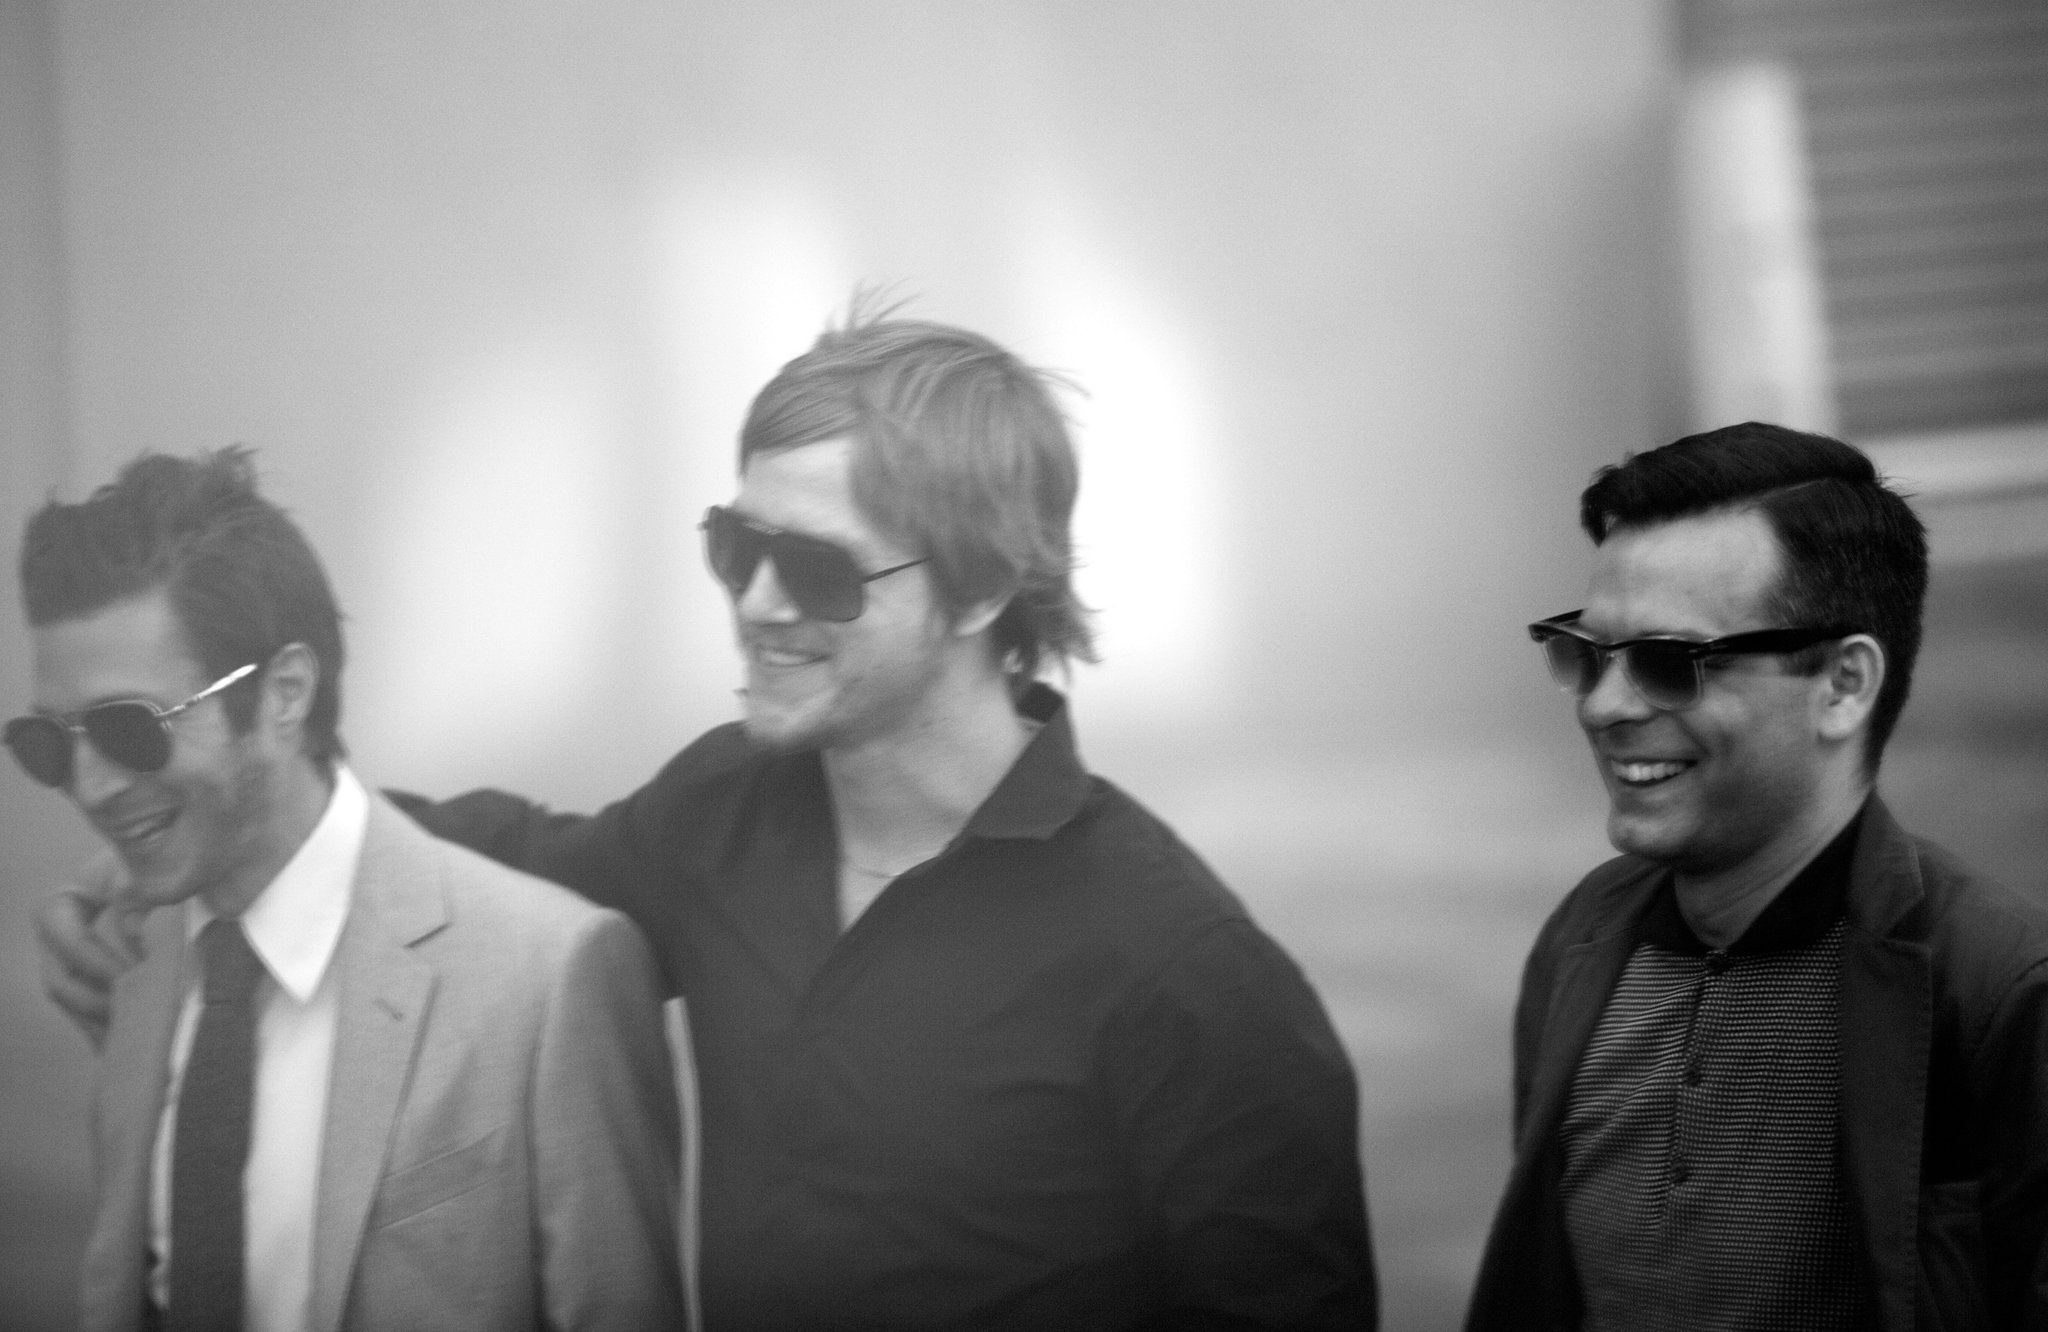 Watch: Interpol Perform Two New Songs “Anywhere” and “My Desire”